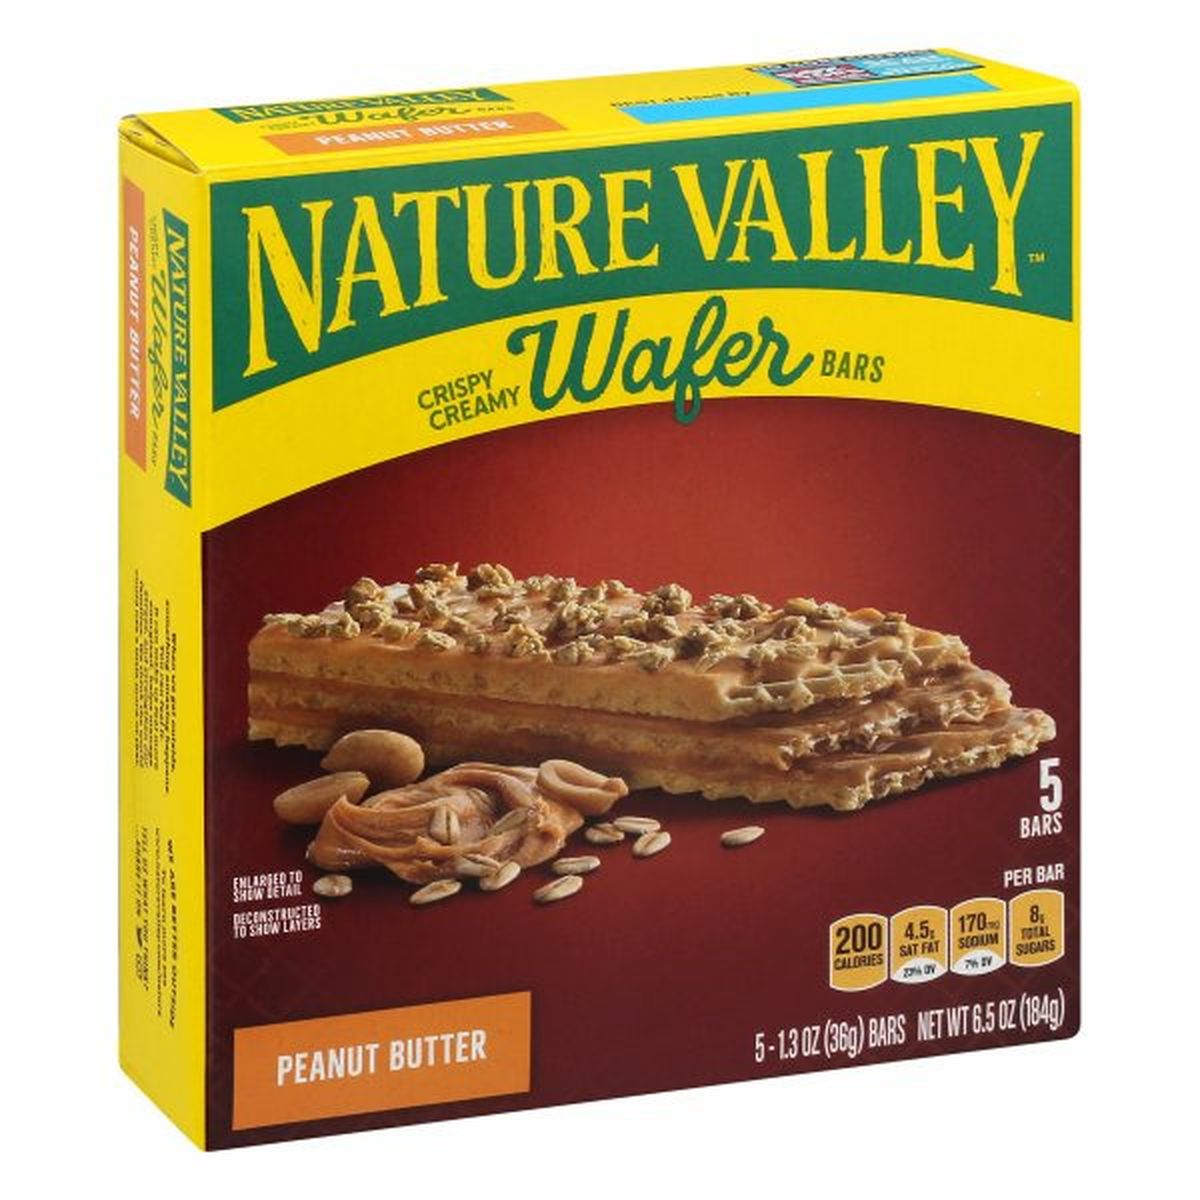 Calories in Nature Valley Wafer Bars, Peanut Butter